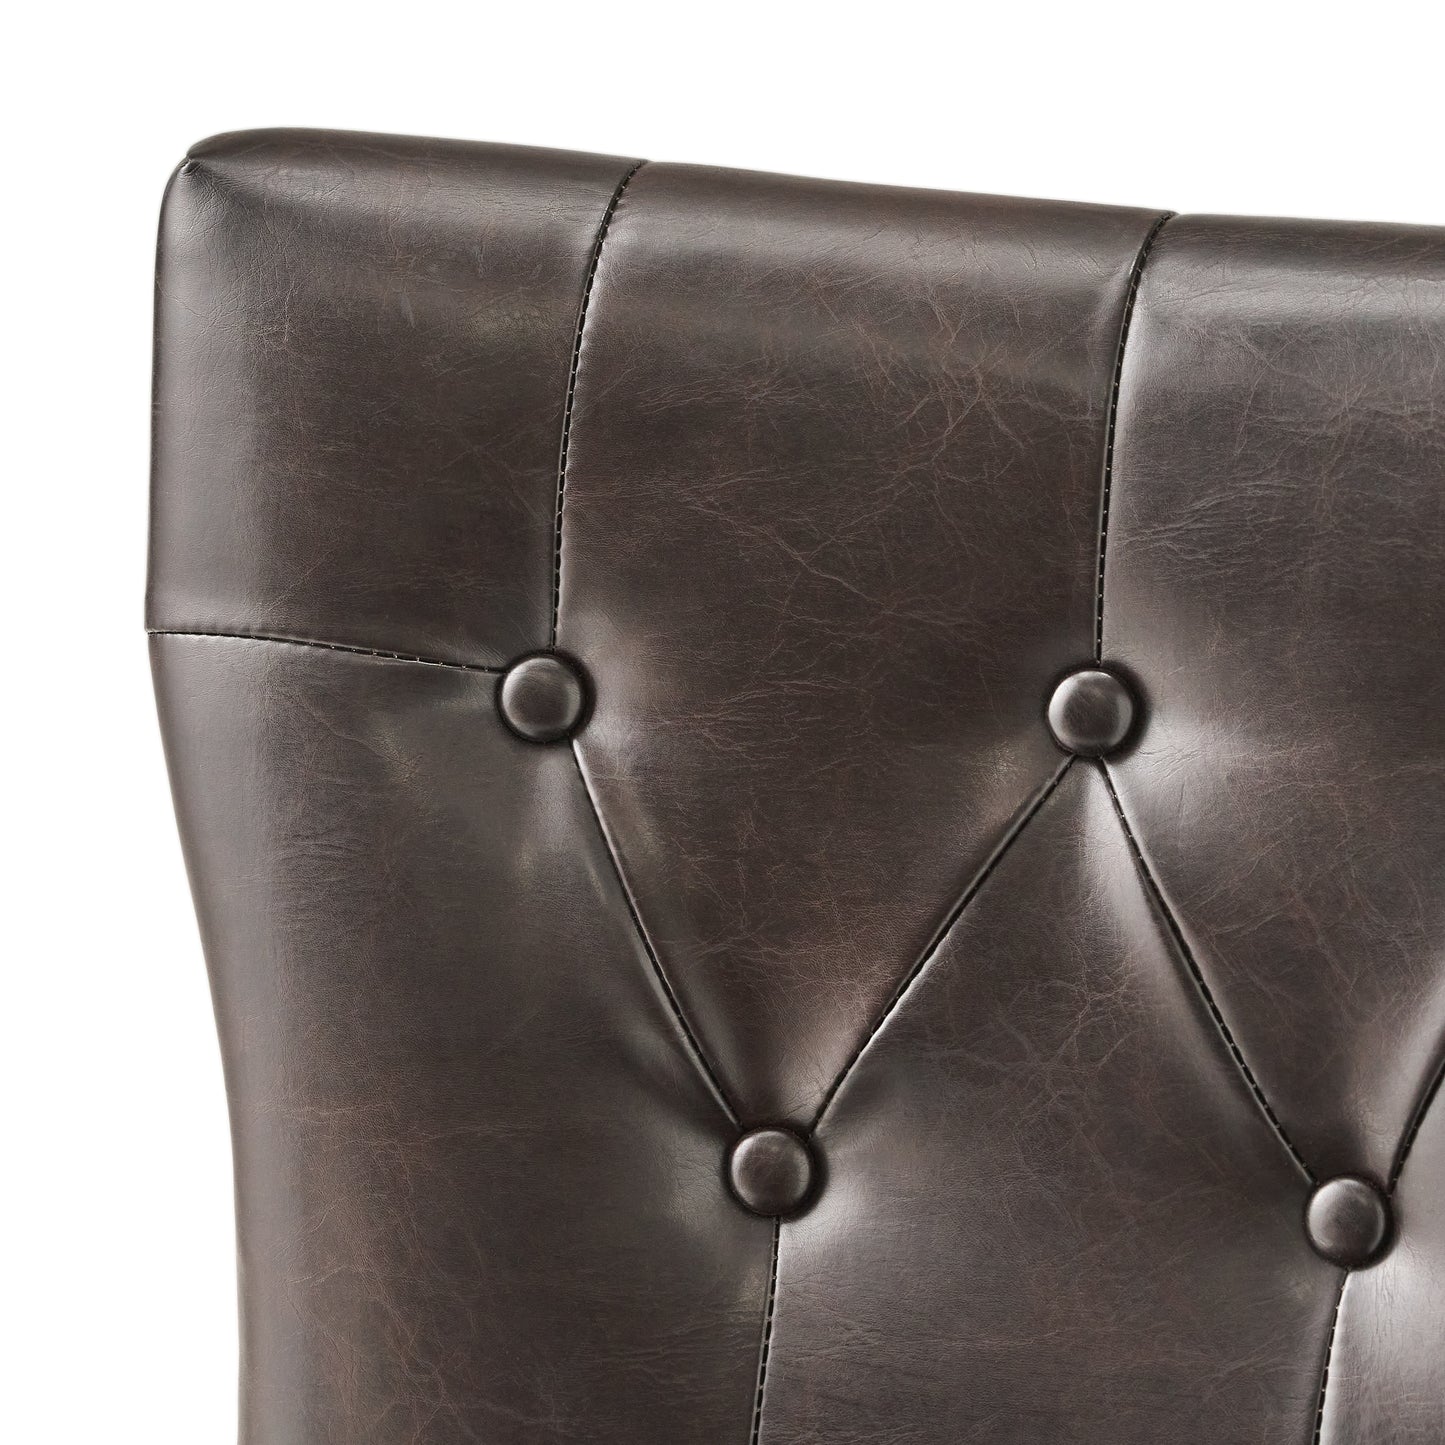 Pierre Contemporary Button Tufted Brown Leather Backed Barstools